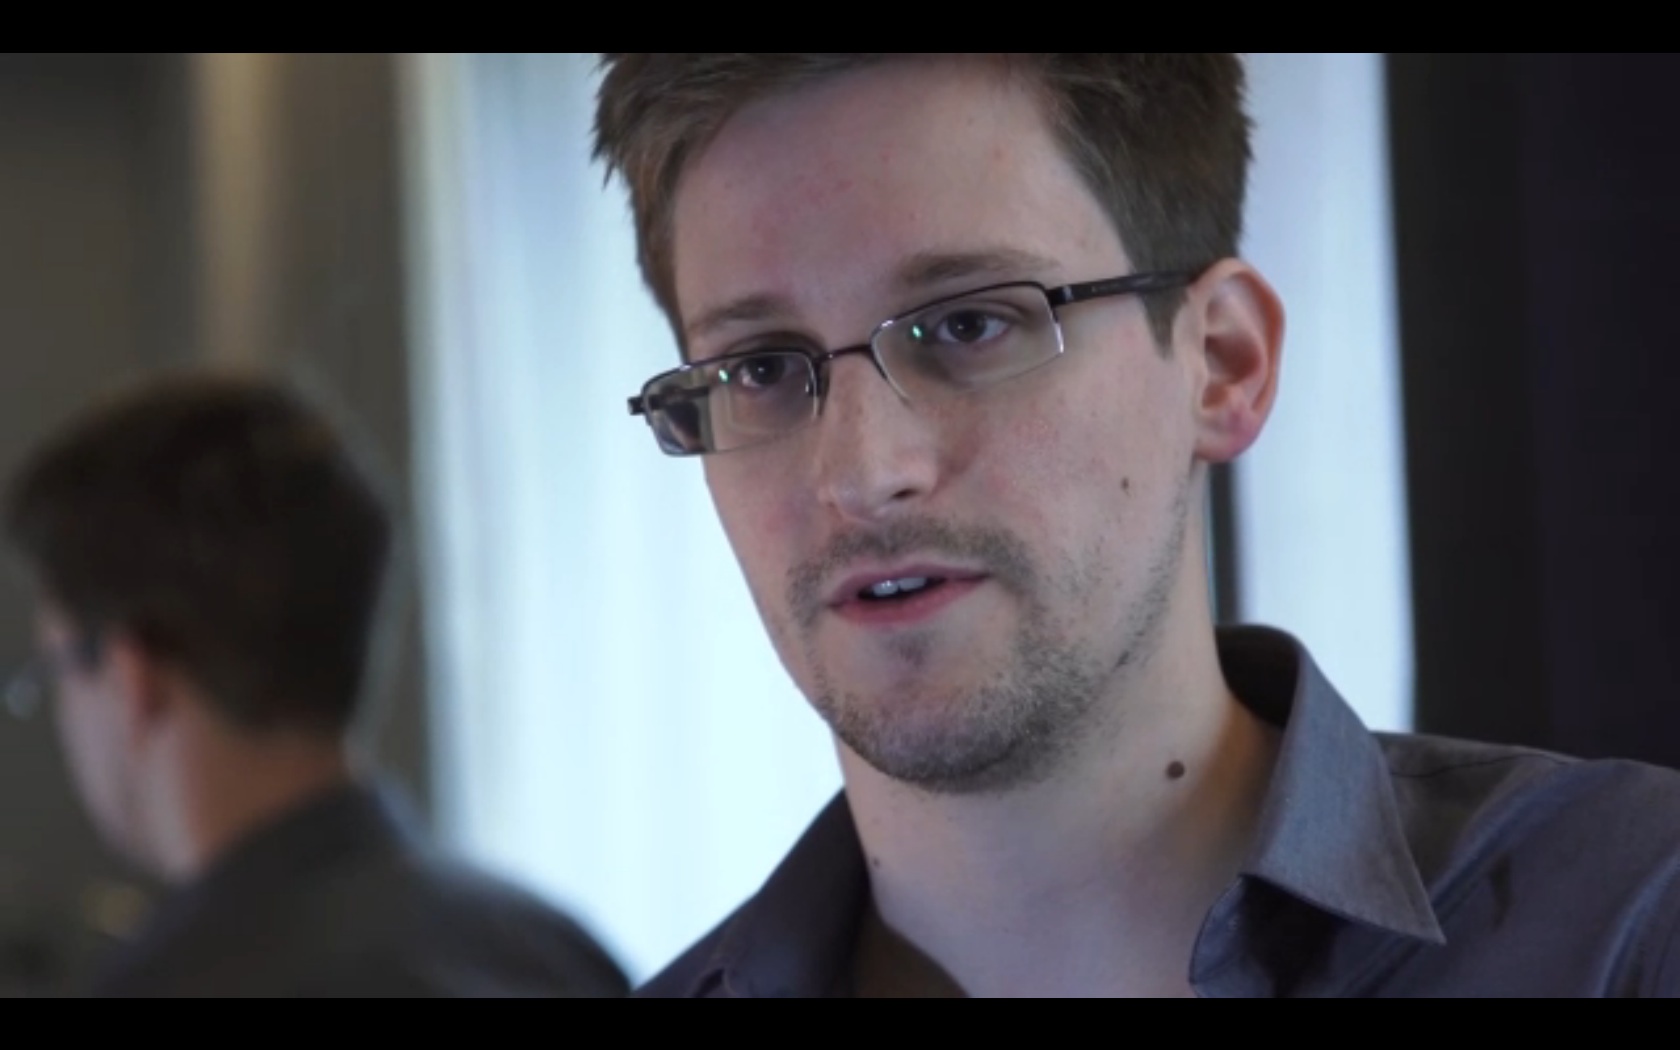 Al Gore: Snowden Performed an ‘Important Service’ by Revealing Spying That Threatens Democracy